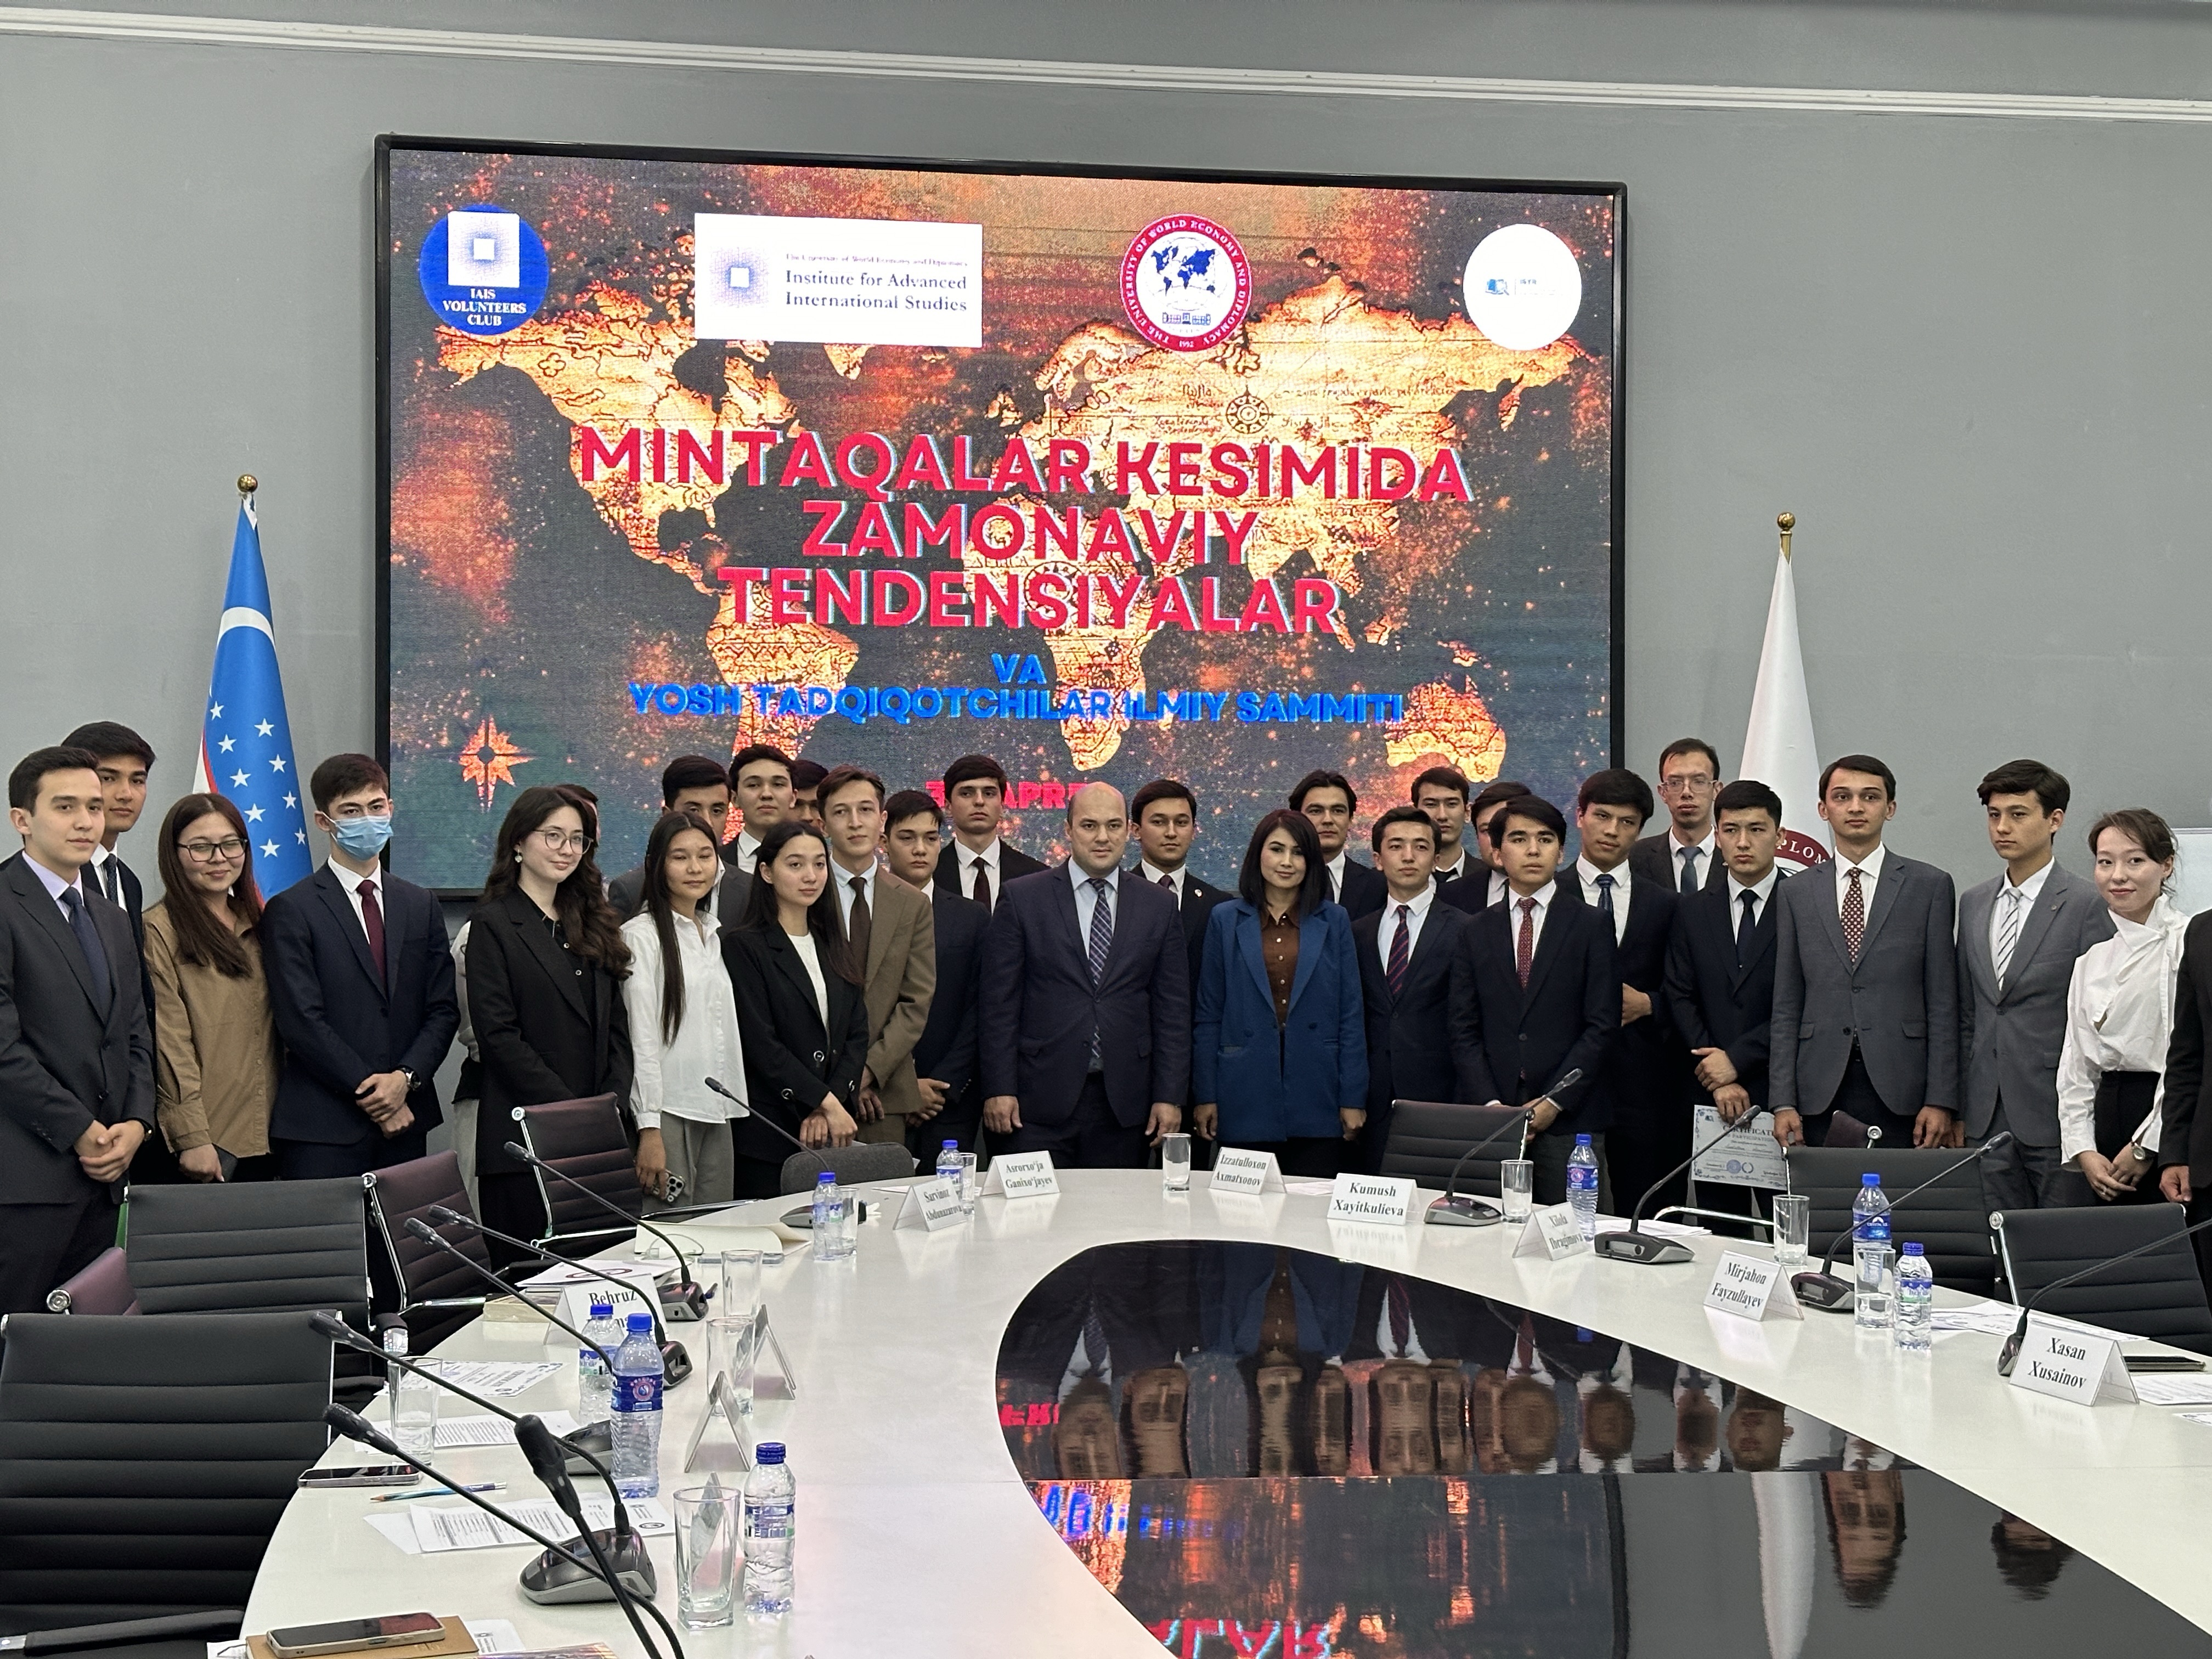 “International Summit of Young Researchers” was held at the University of World Economy and Diplomacy